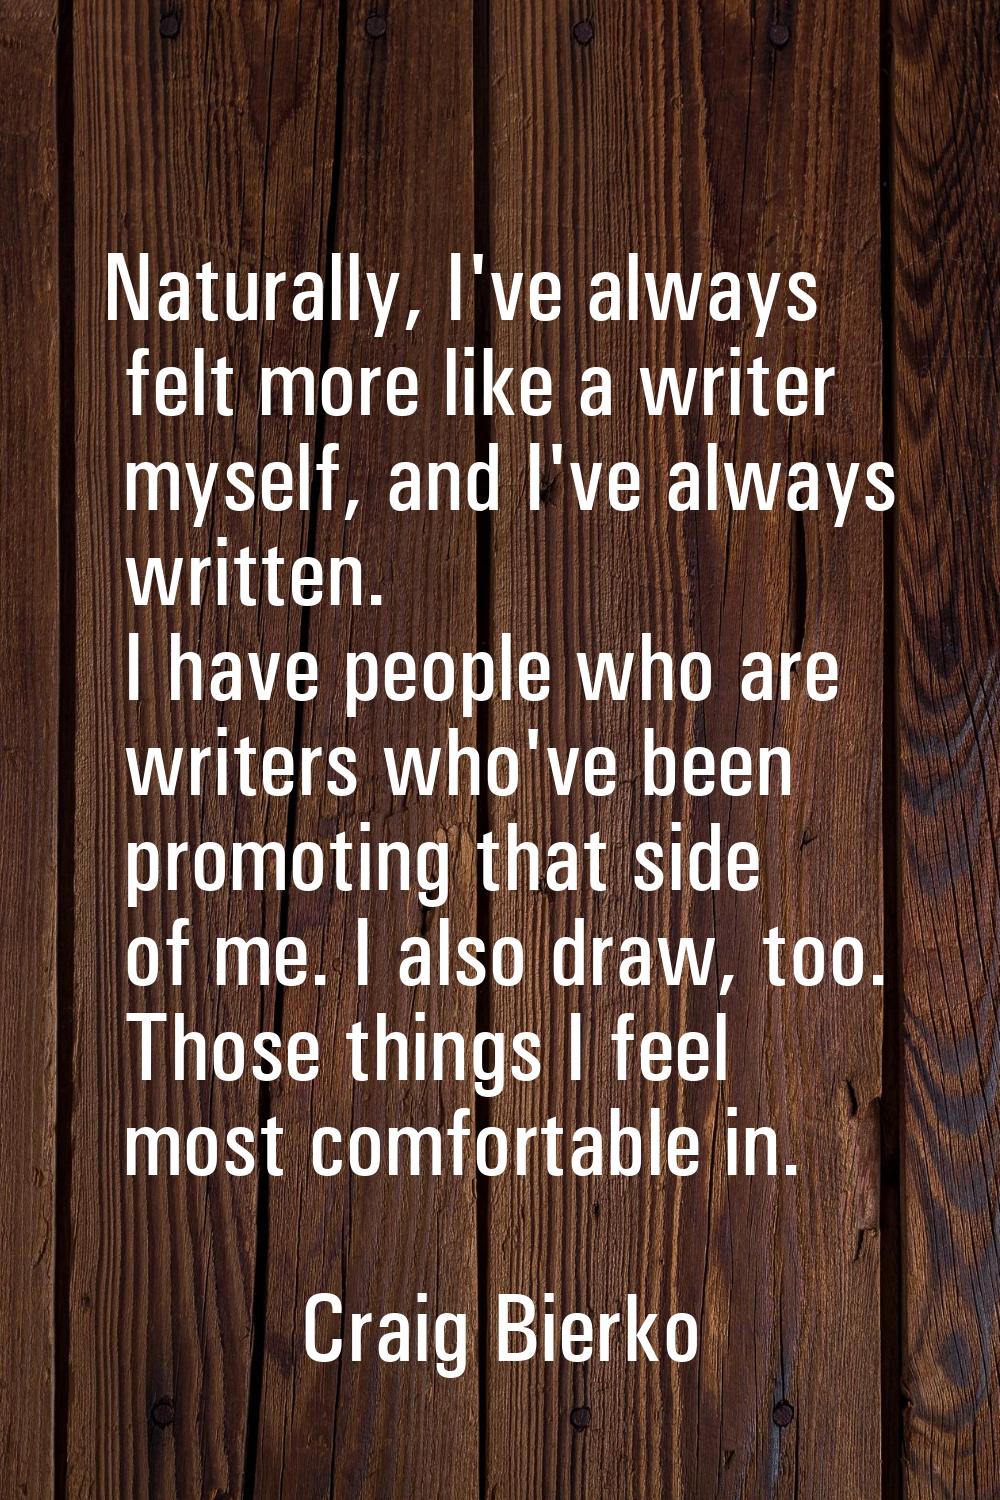 Naturally, I've always felt more like a writer myself, and I've always written. I have people who a